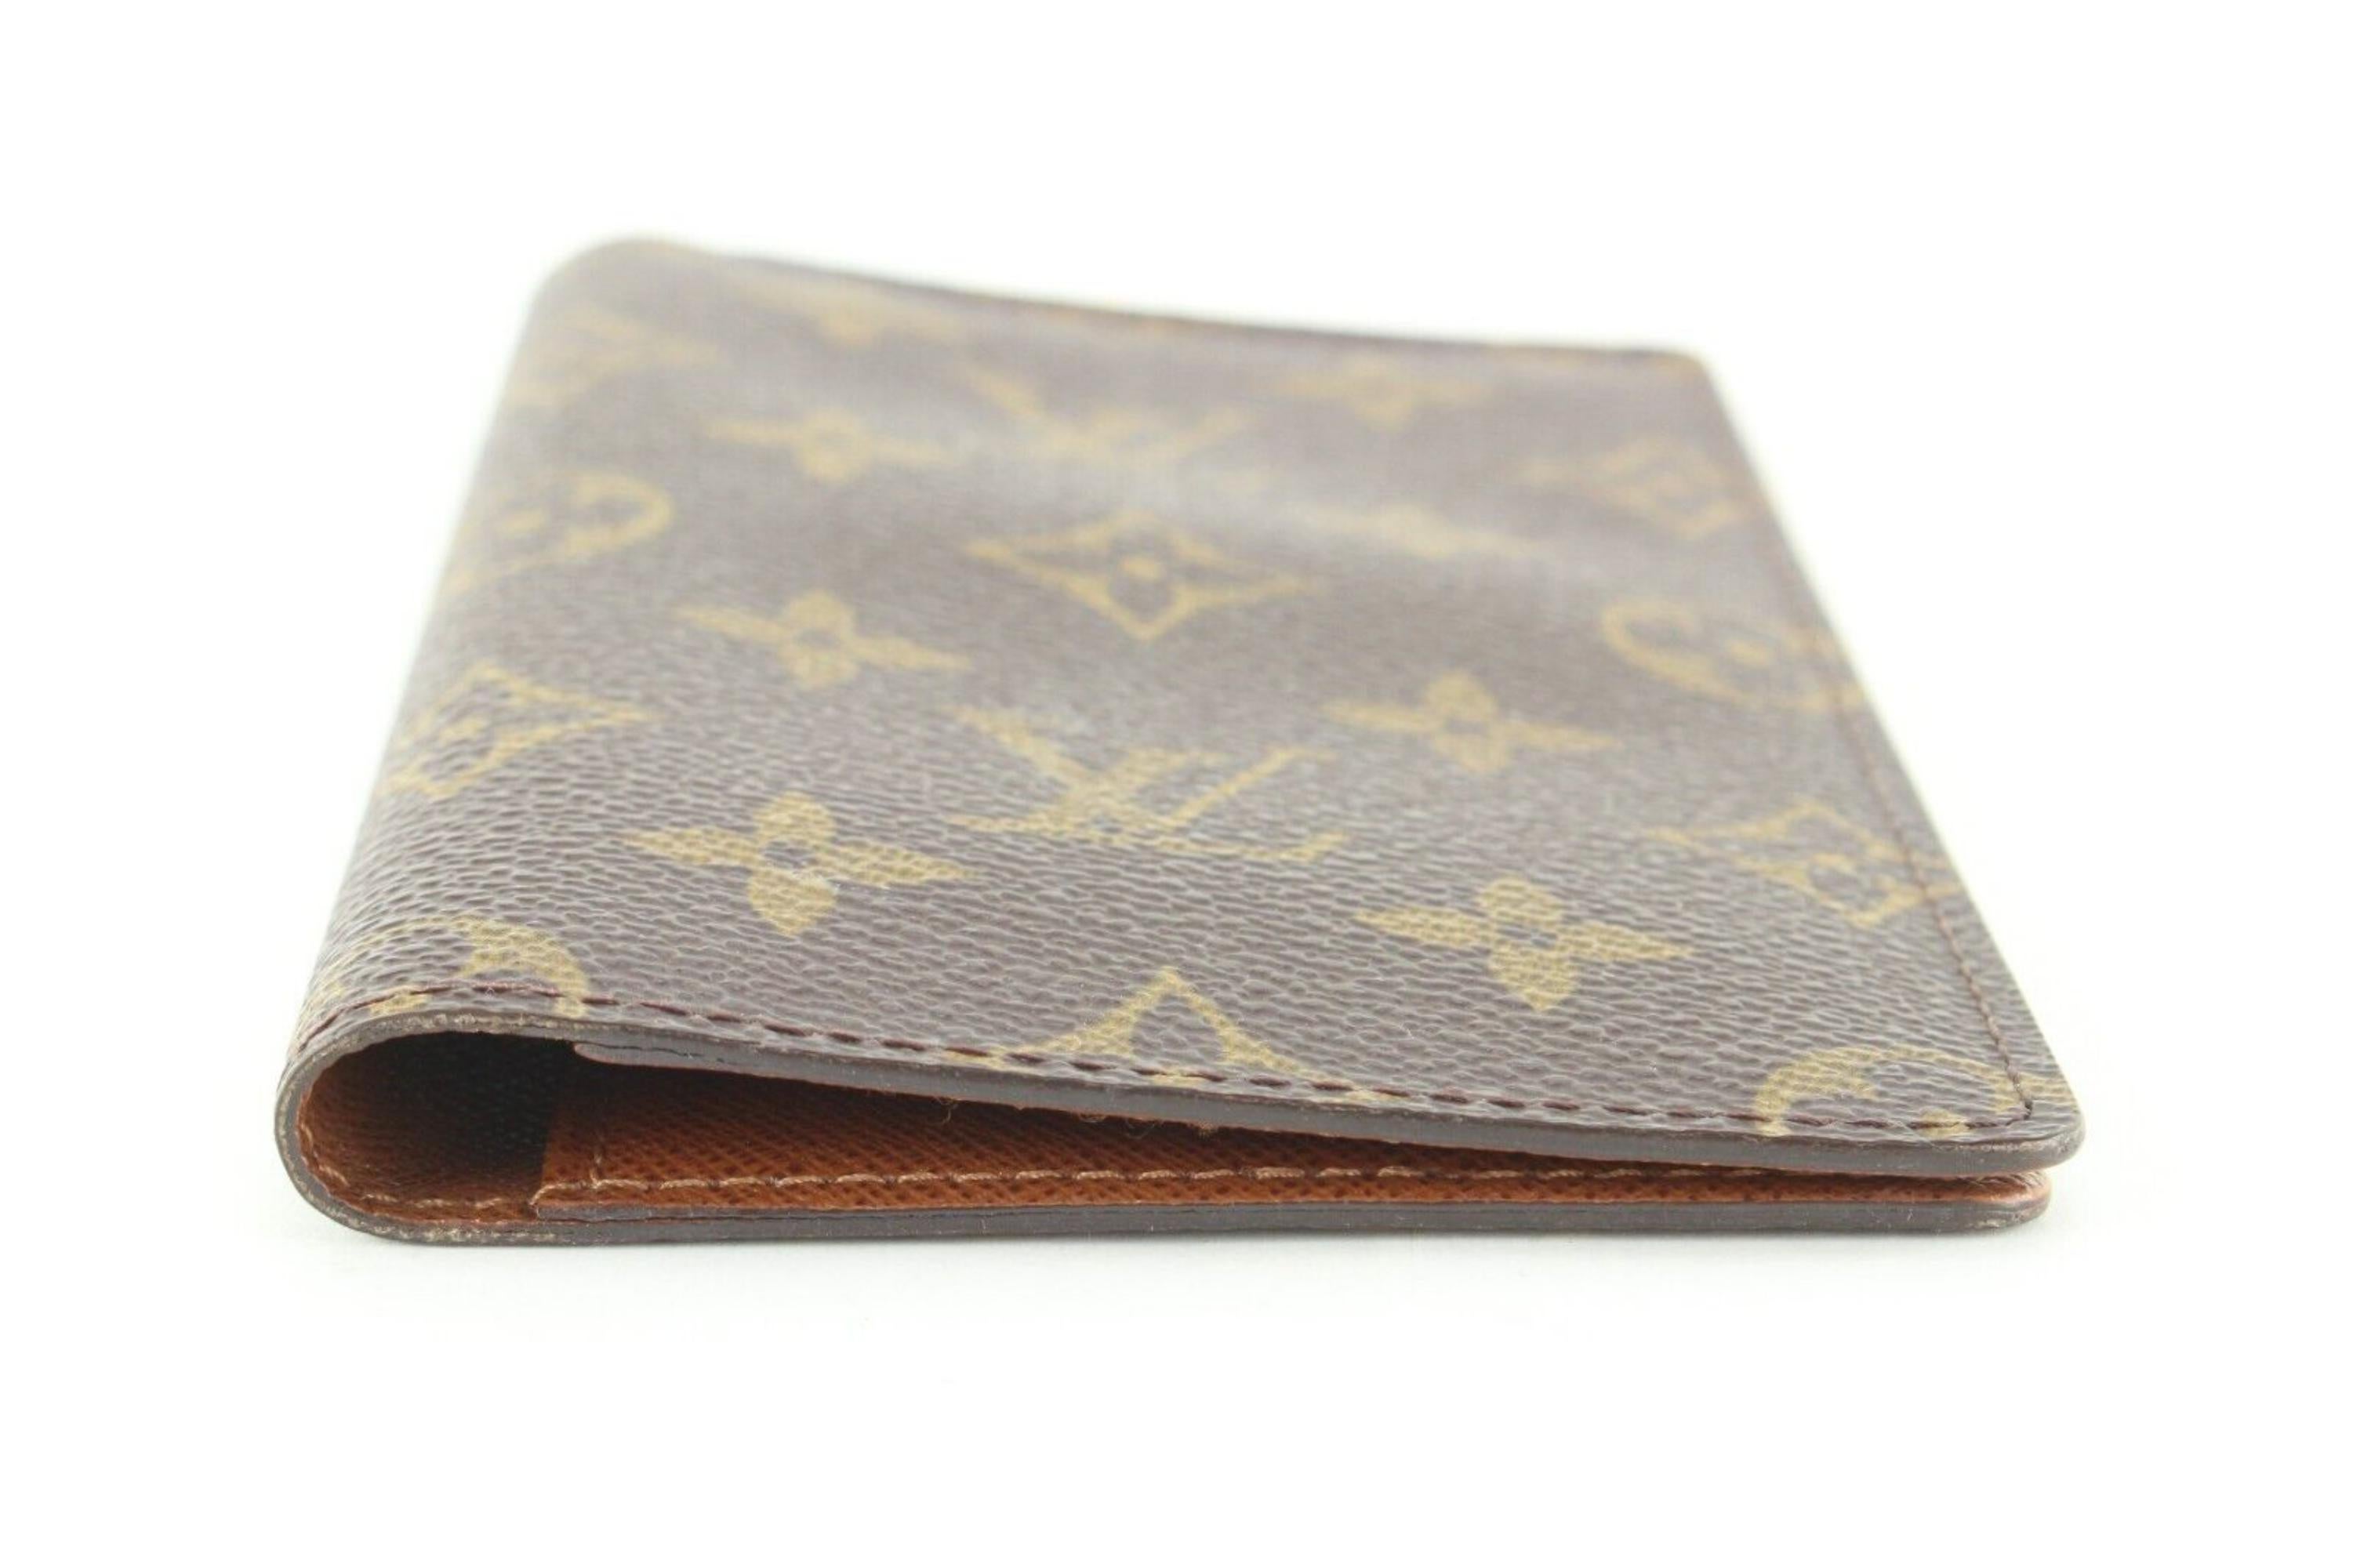 Louis Vuitton Monogram Checkbook Cover Long Flap Wallet 8LK0216 In Excellent Condition In Dix hills, NY